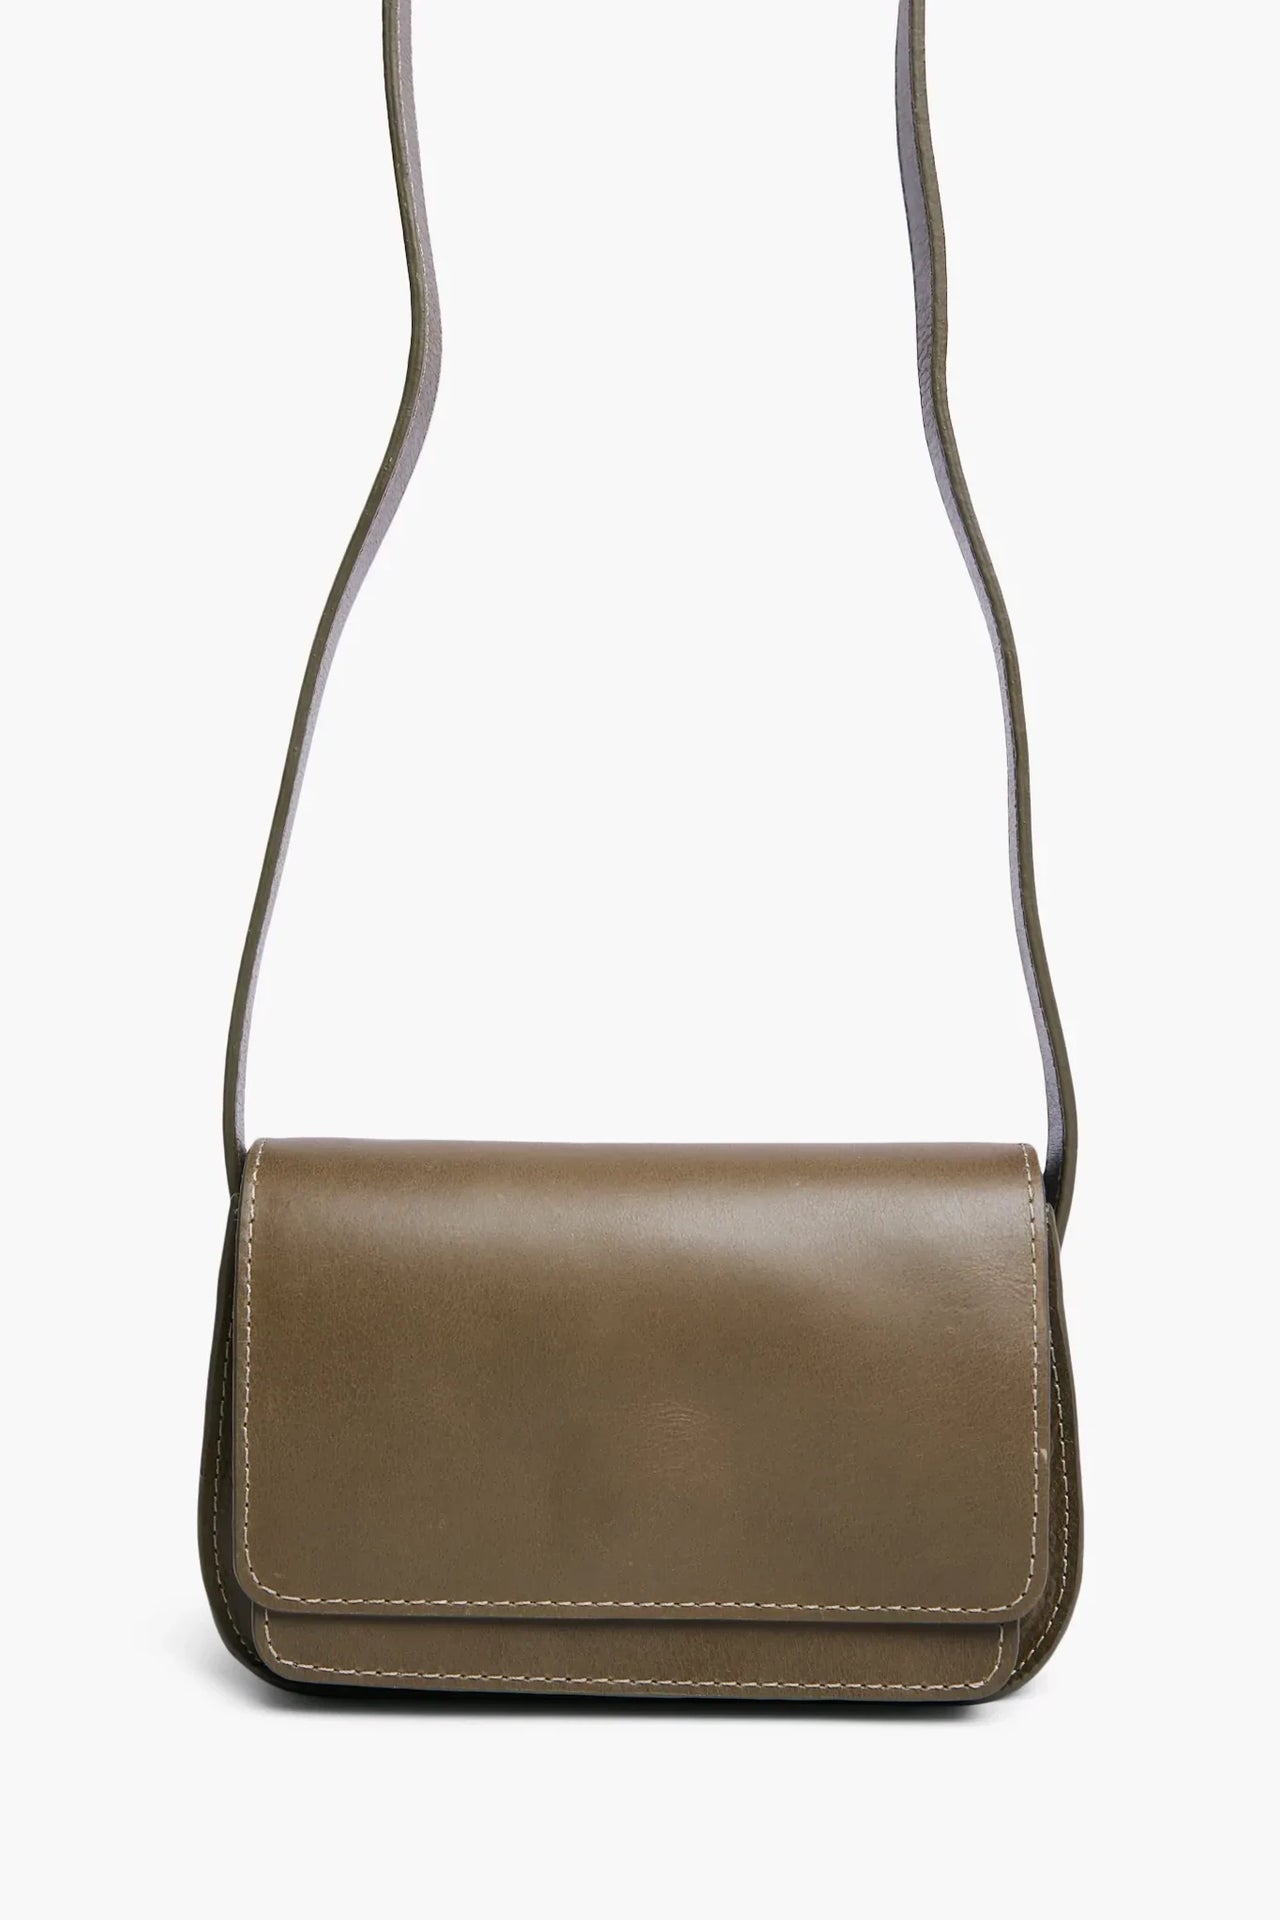 ABLE - The Gessi Crossbody